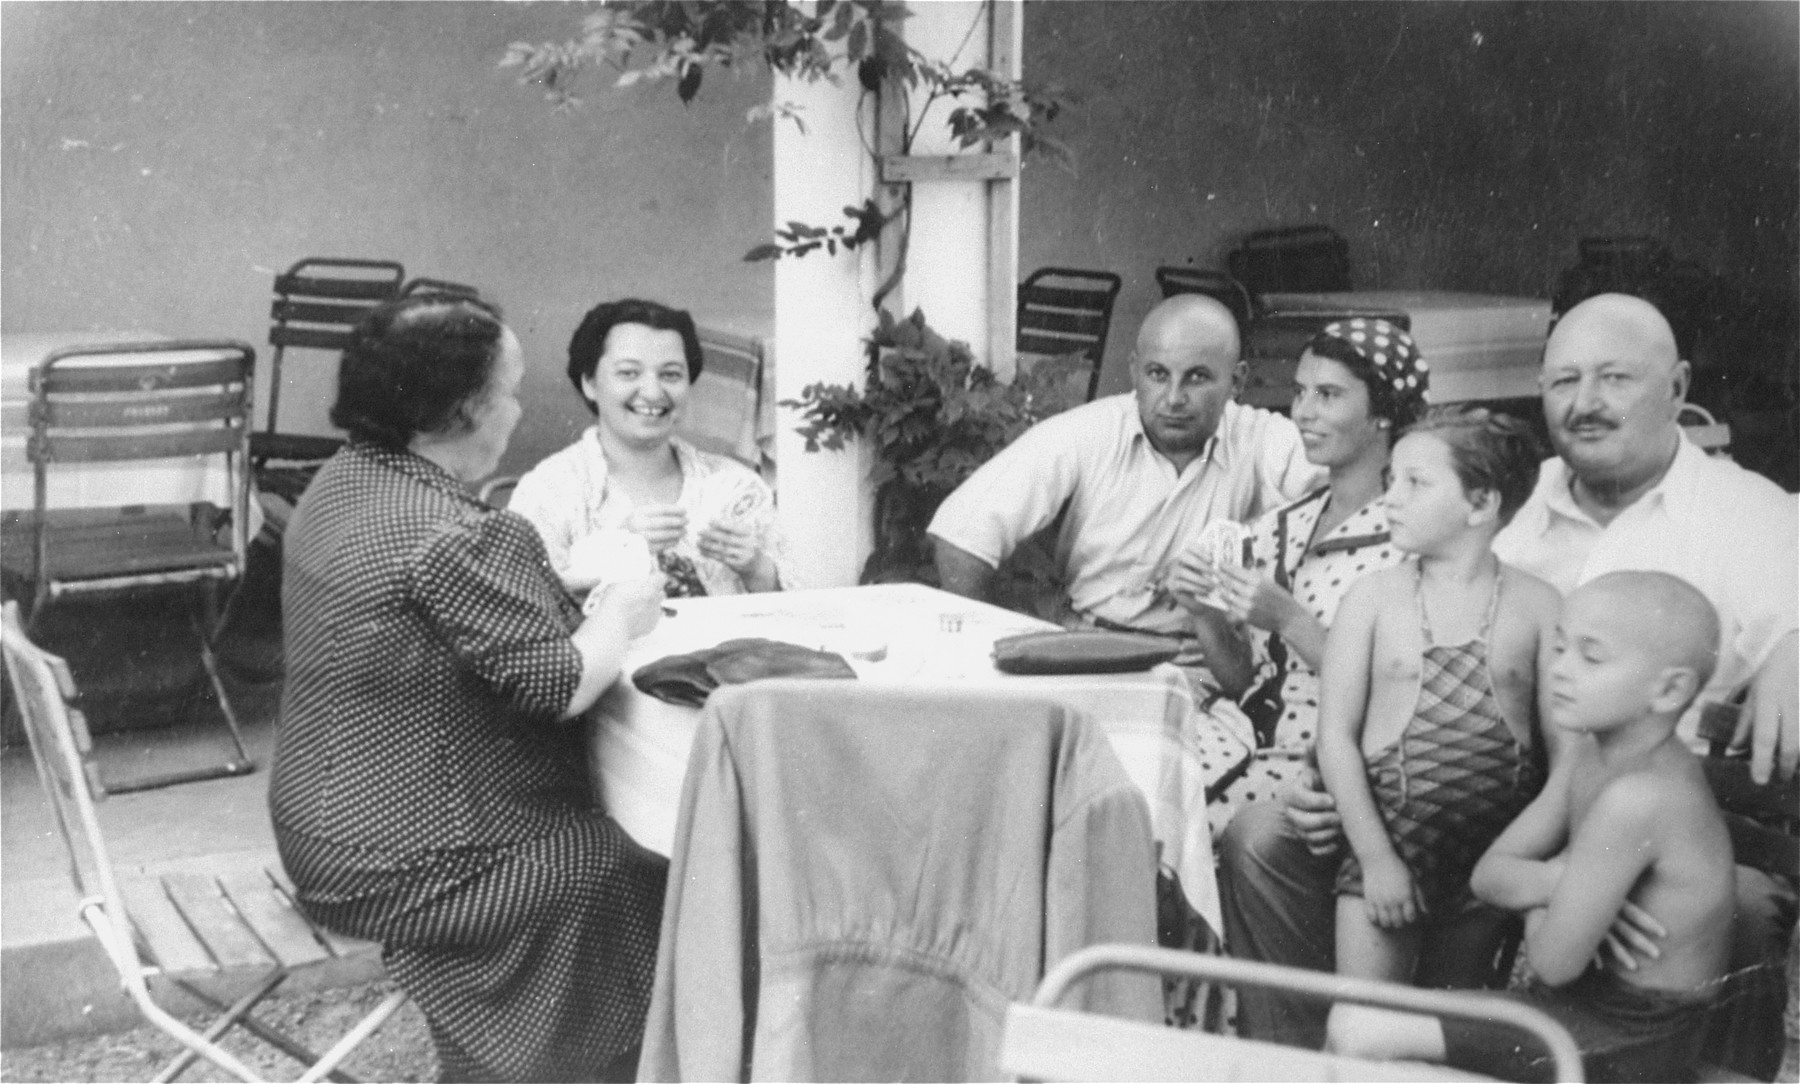 The Muller and Herzog families play cards at a resort hotel in Czechoslovakia.

Pictured at the far left are Lilly Herzog and the donor, Magda Herzog Muller; at the far right is Jakub Herzog with his two grandchildren, Alice and Heinrich.